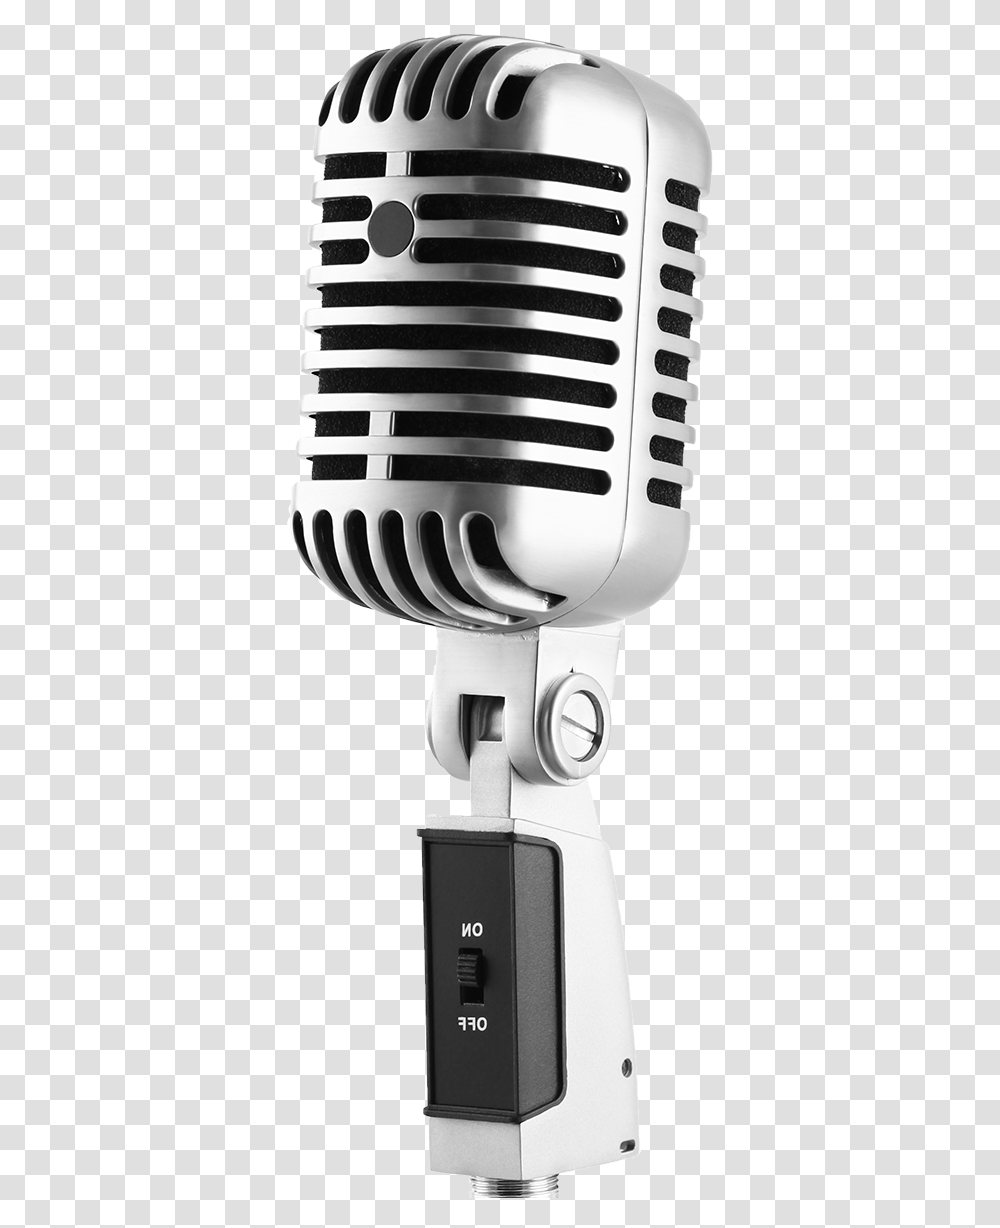 Microphone Clipart Images Background Microphone, Electrical Device, Helmet, Clothing, Apparel Transparent Png